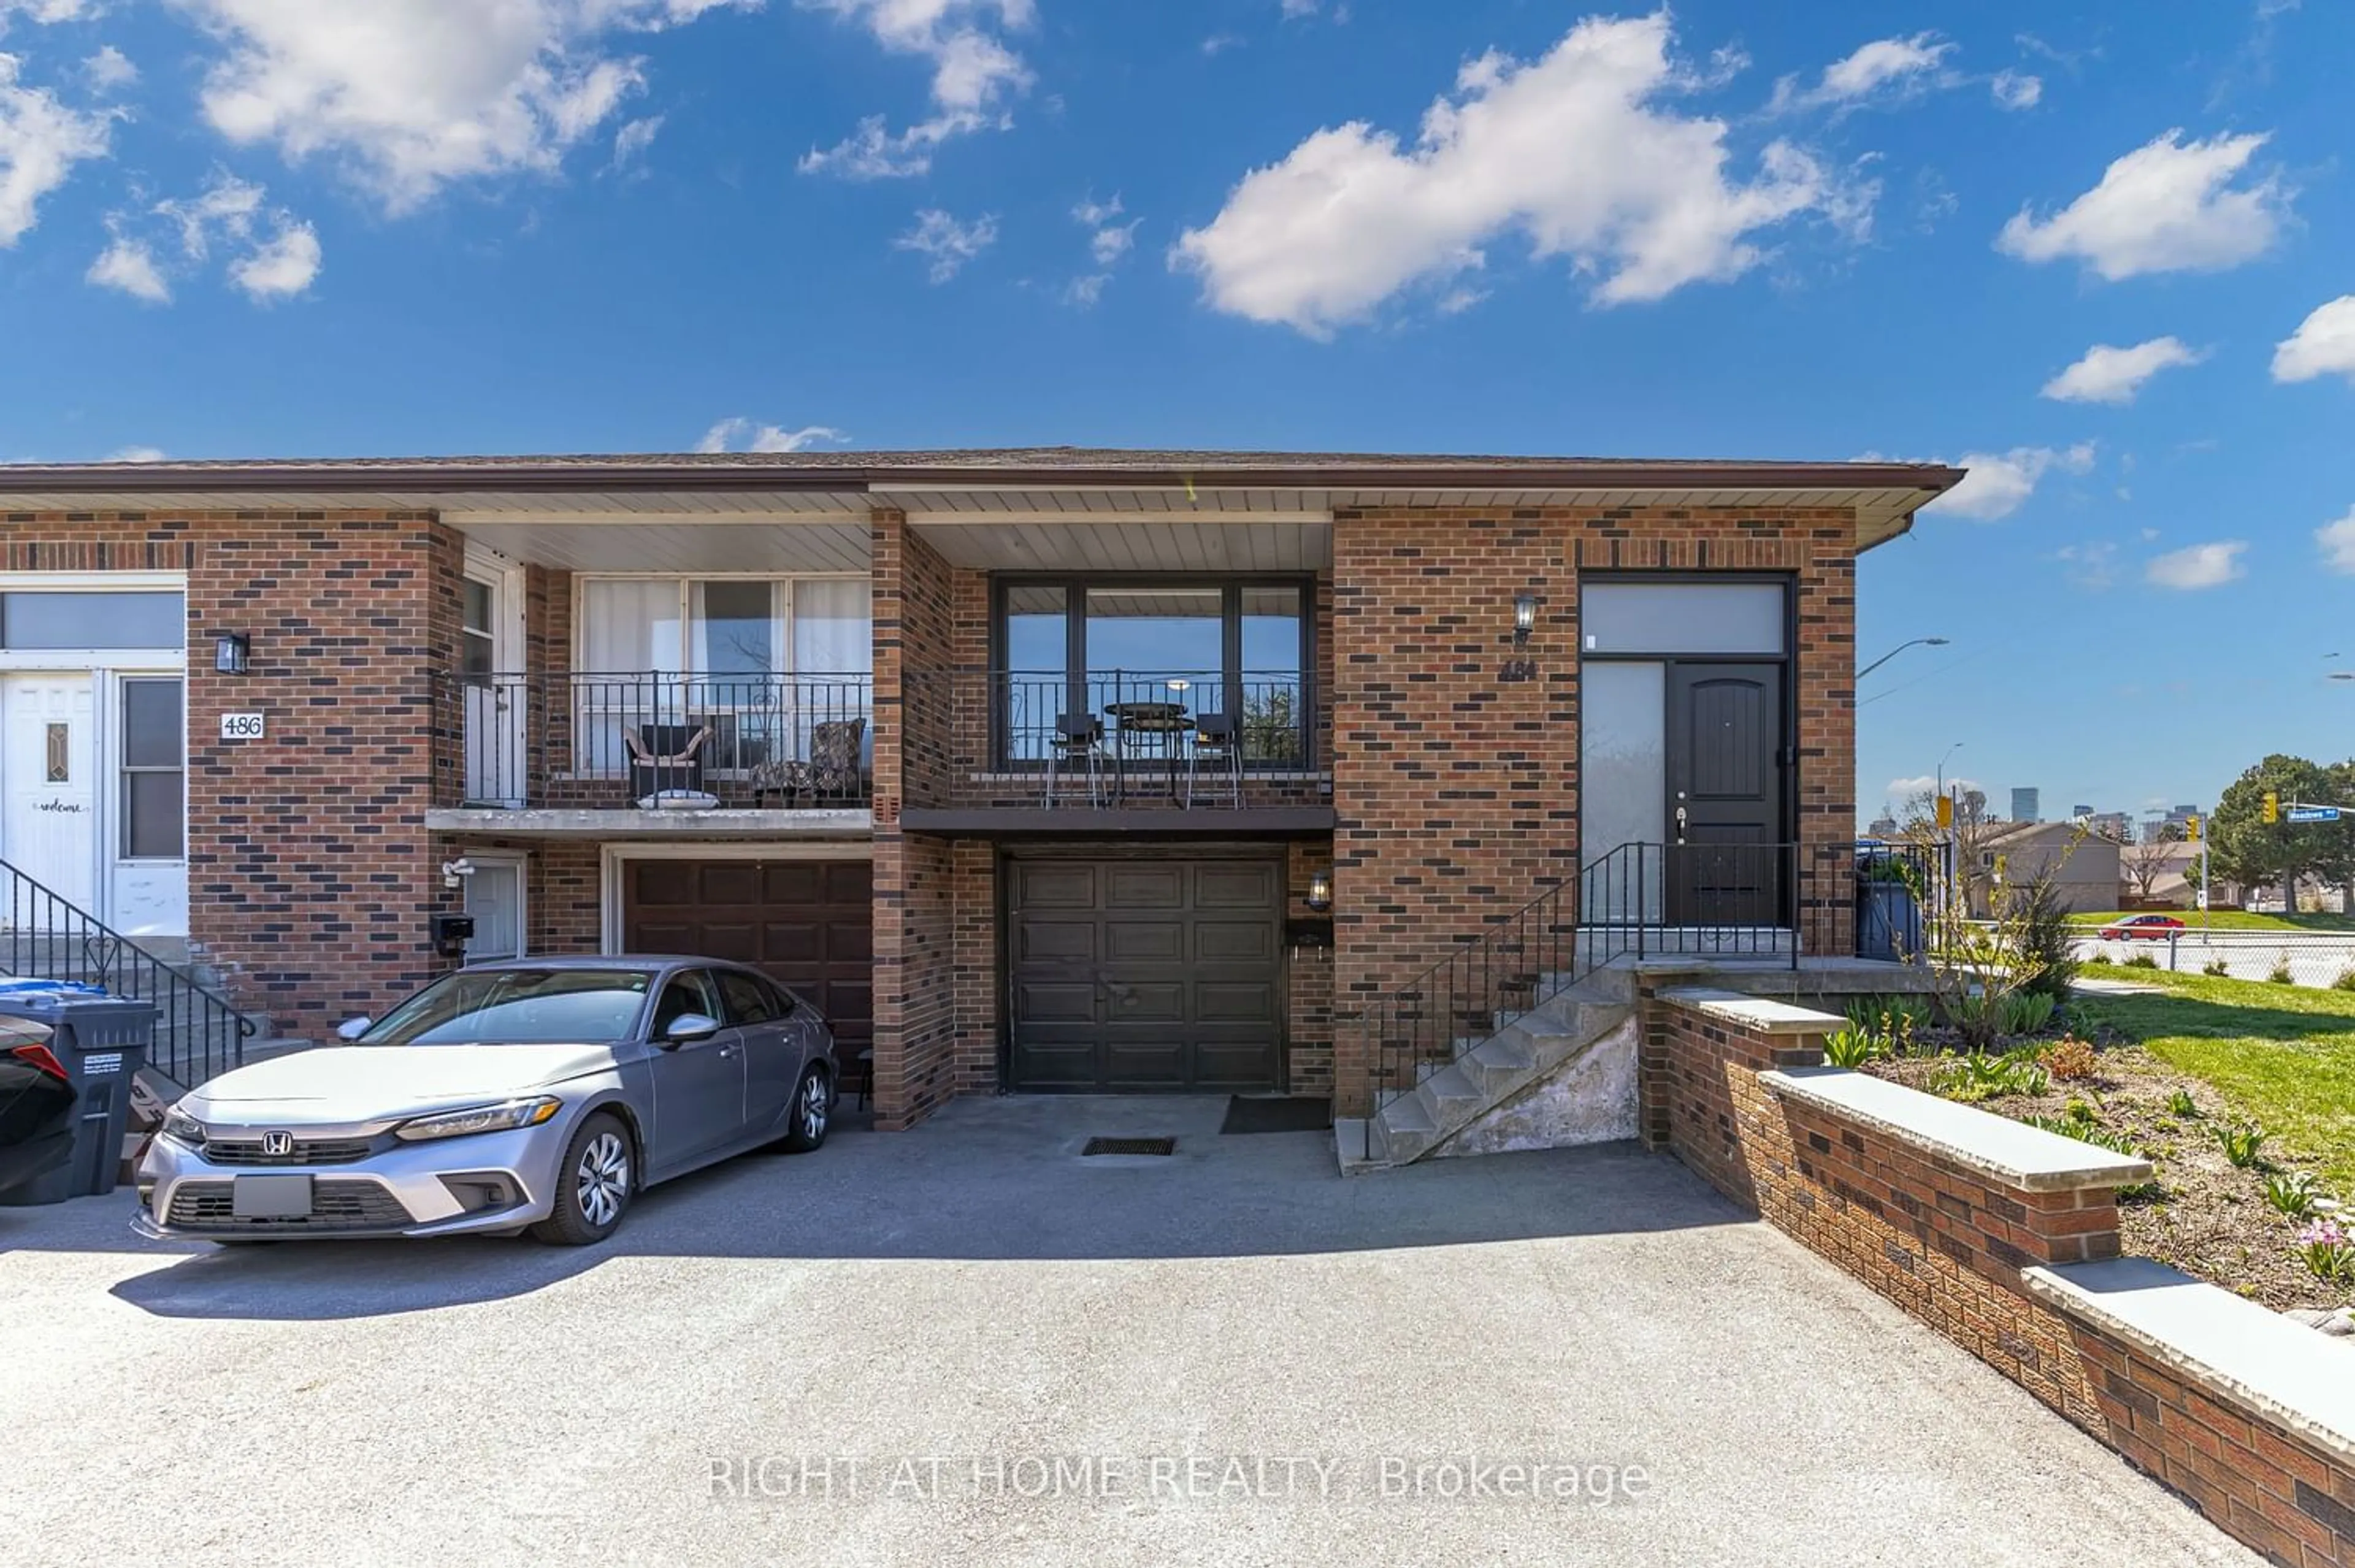 Home with brick exterior material for 484 Kelvedon Mews, Mississauga Ontario L4Z 1G4